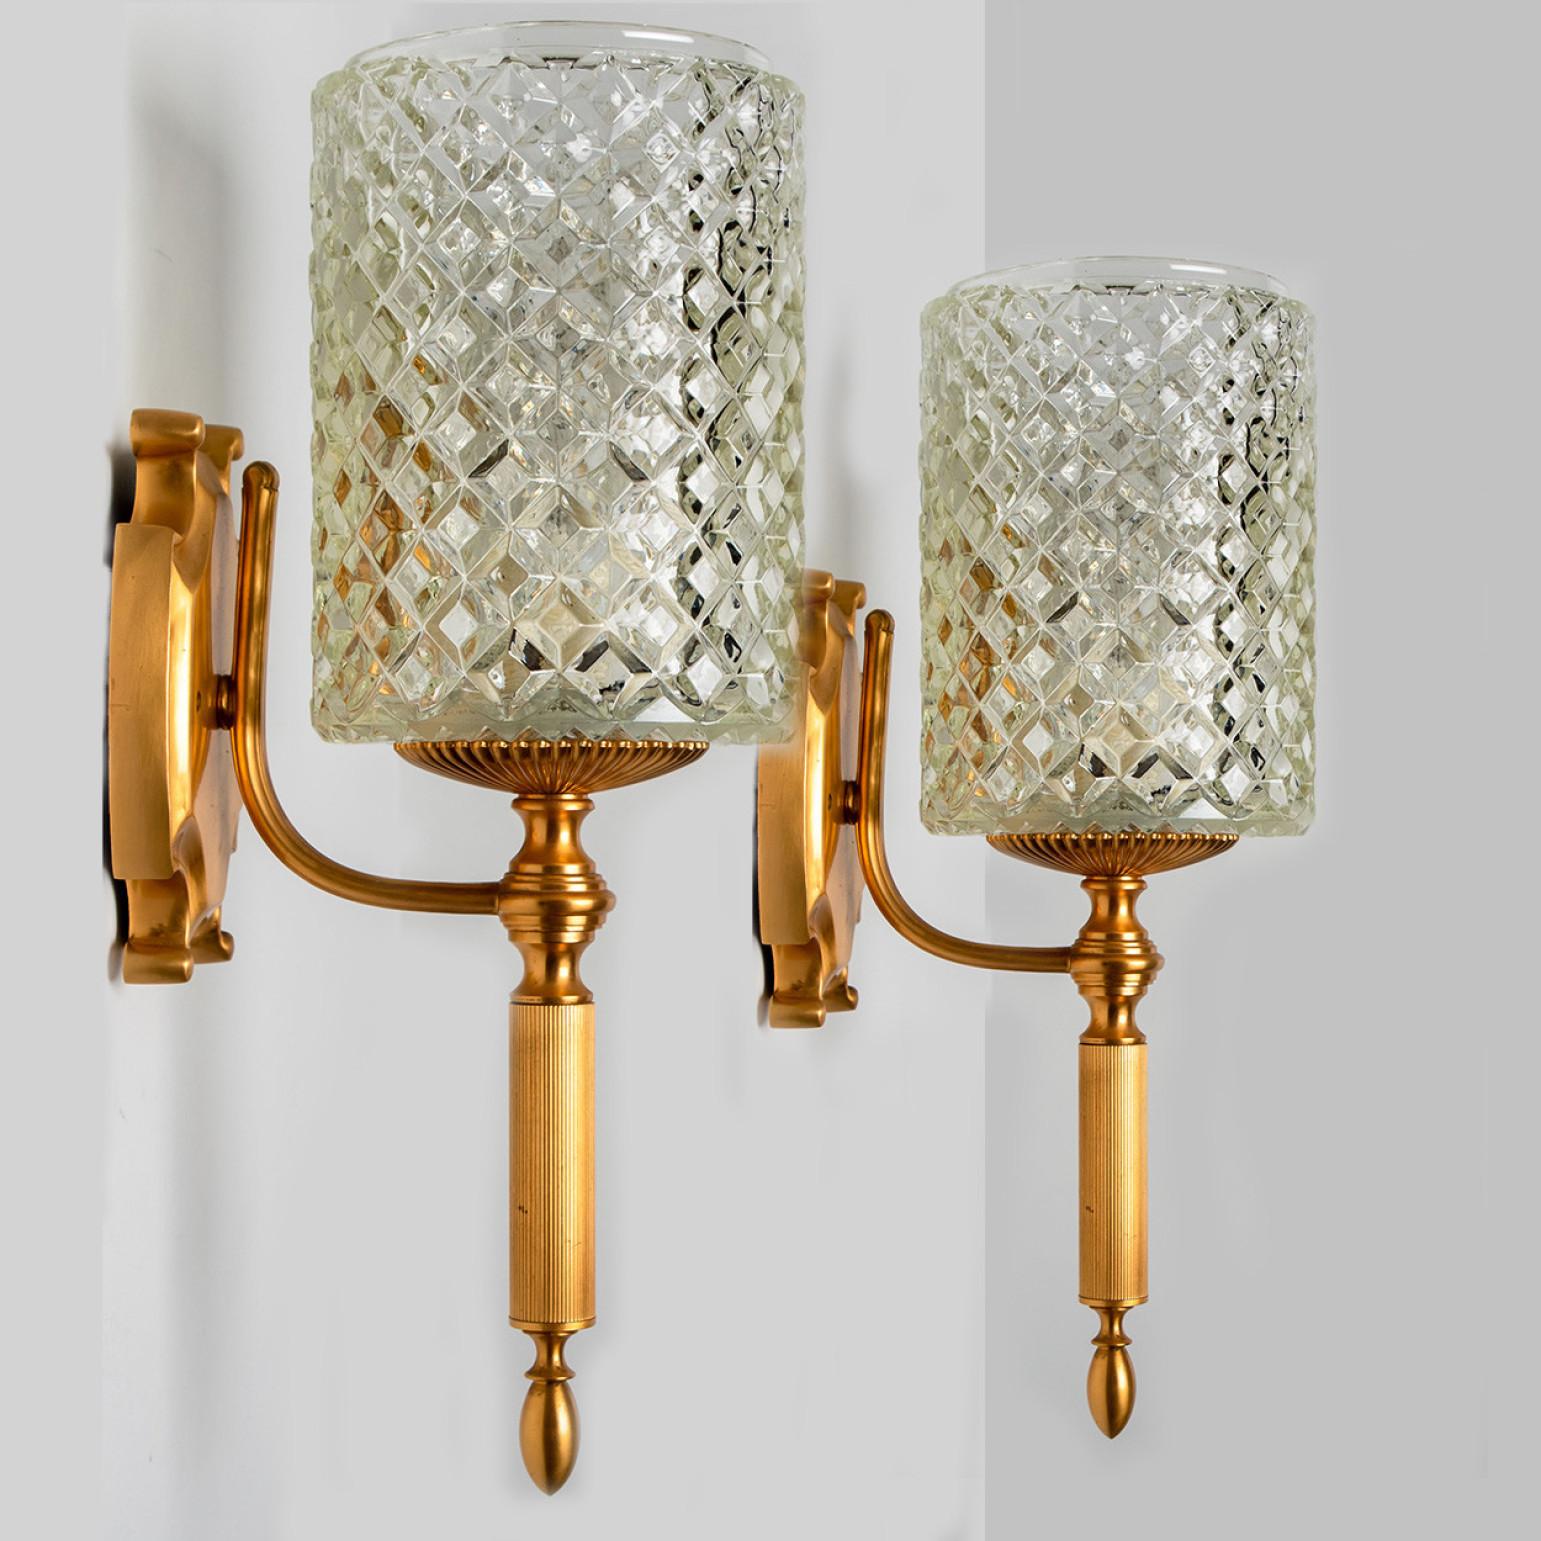 Elegant light fixtures from Europe, Germany around 1960. The glass shows a beautiful diamond texture, which gives a diffuse light effect and a nice pattern on ceiling, walls and floor.
The stylish elegance of this light suits many environment, from